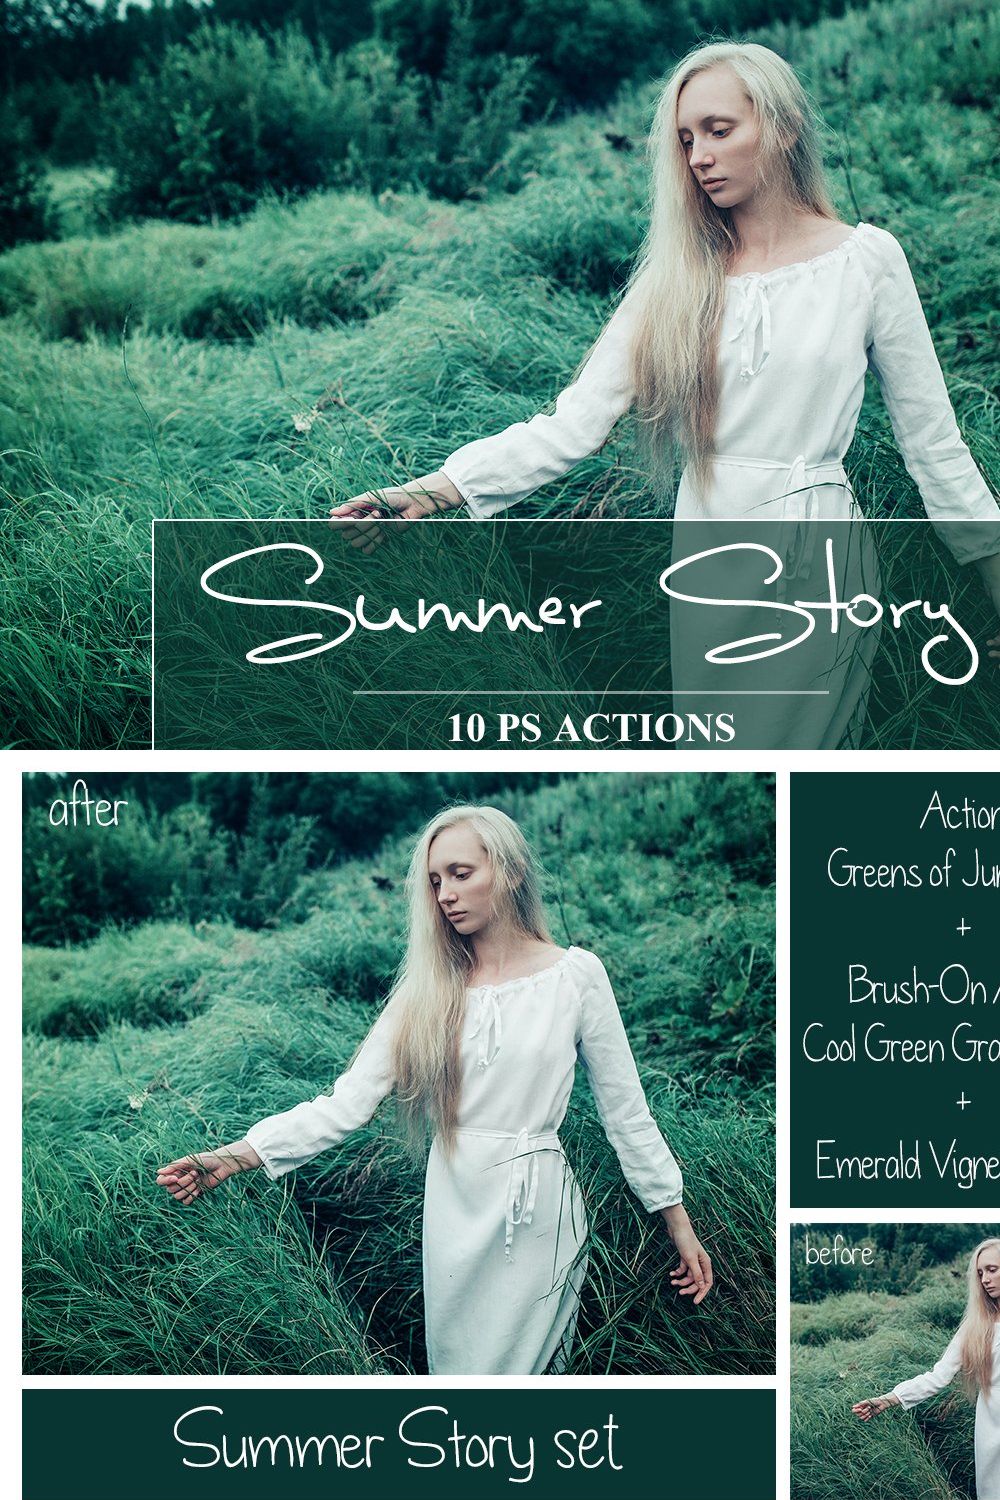 Summer Story - PS Actions Set pinterest preview image.